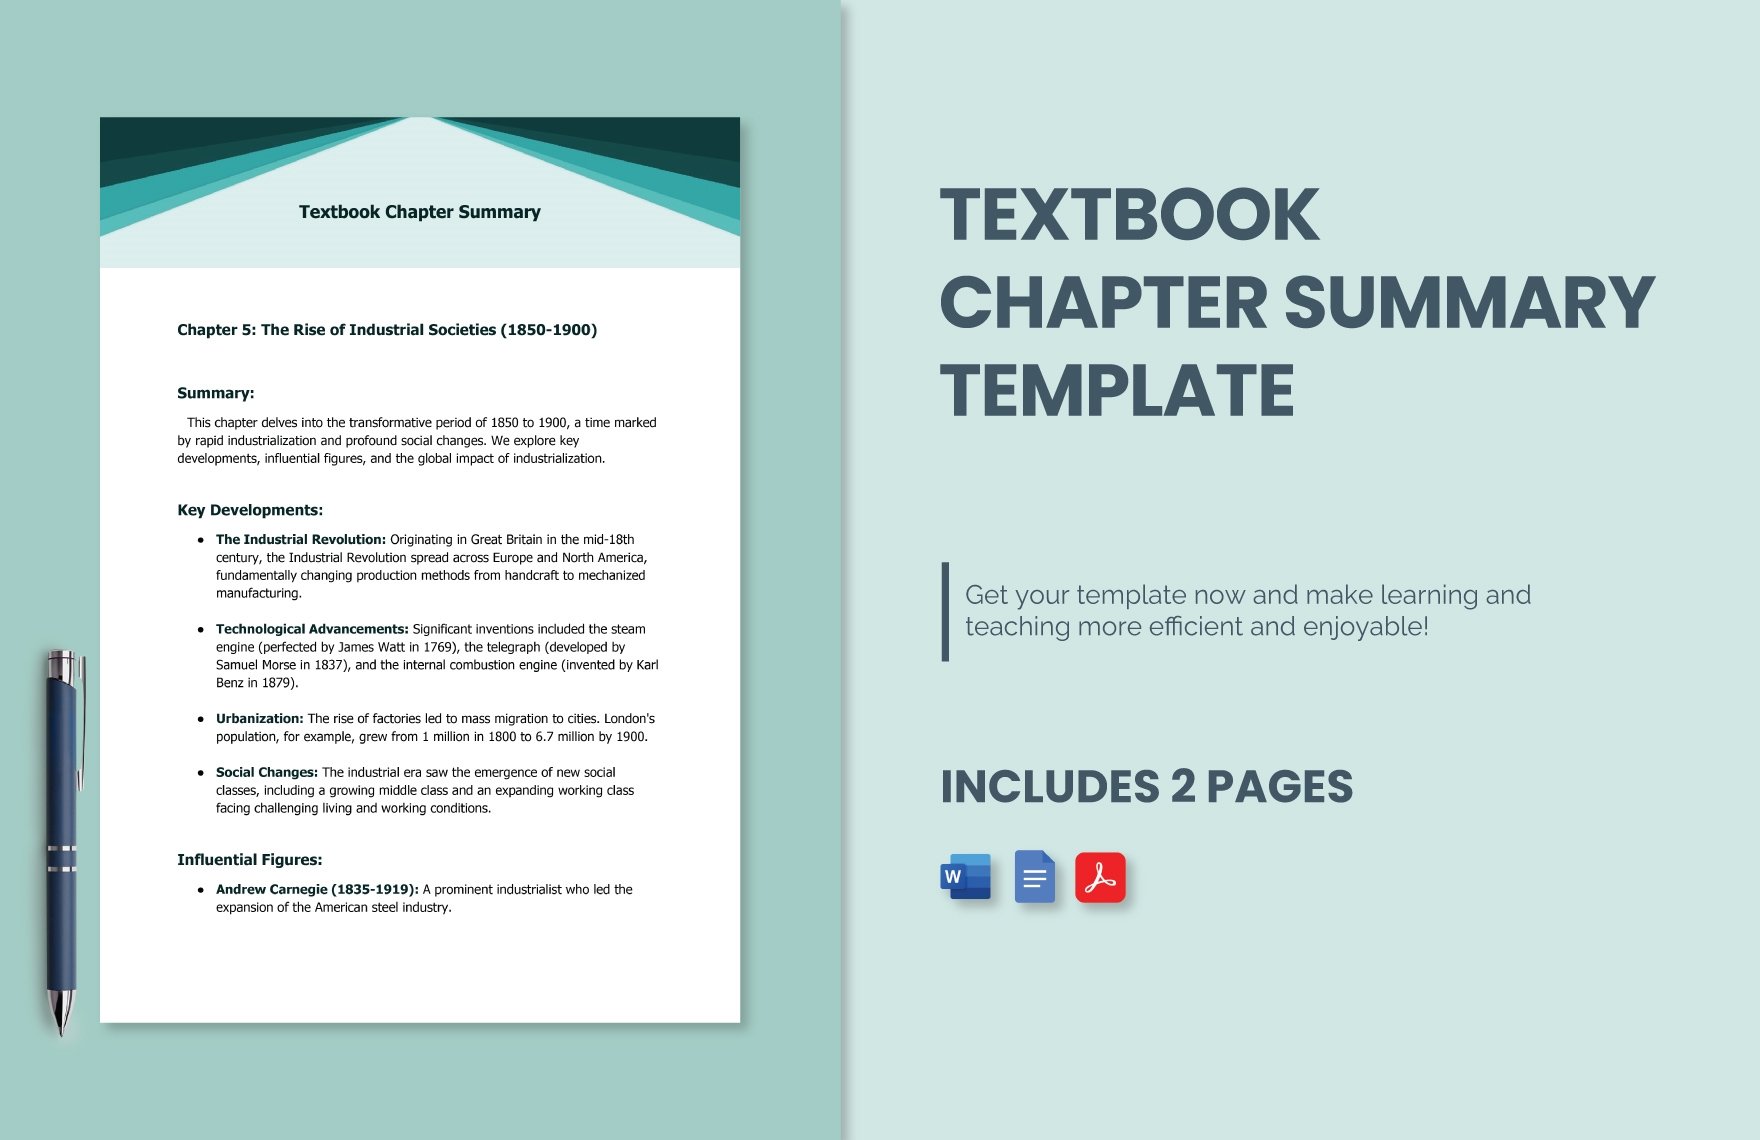 Free Textbook Chapter Summary Template in Word, Google Docs, PDF